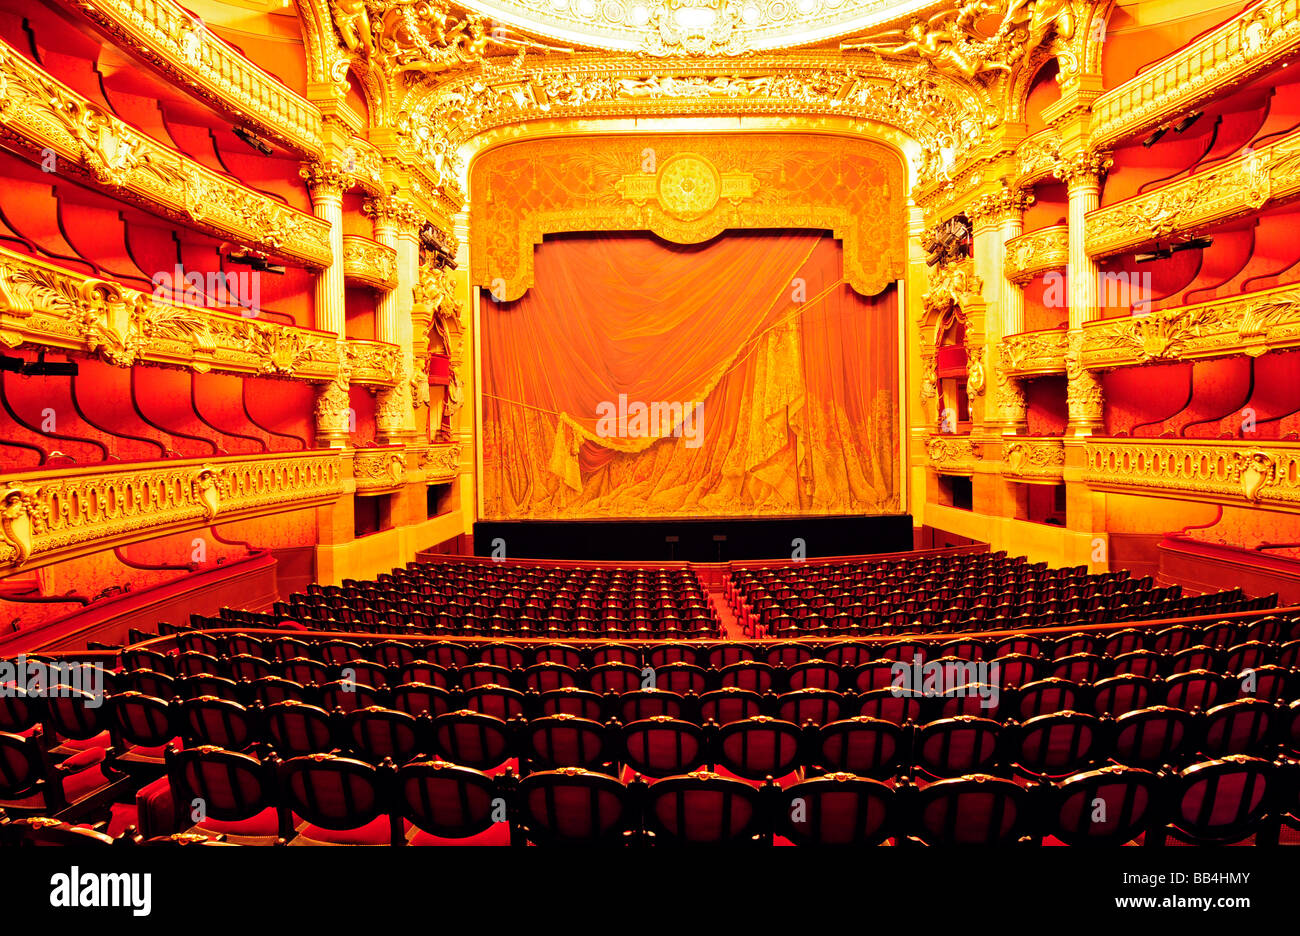 The performance hall of the palais garnier, the most famous opera house in Paris, France. Stock Photo